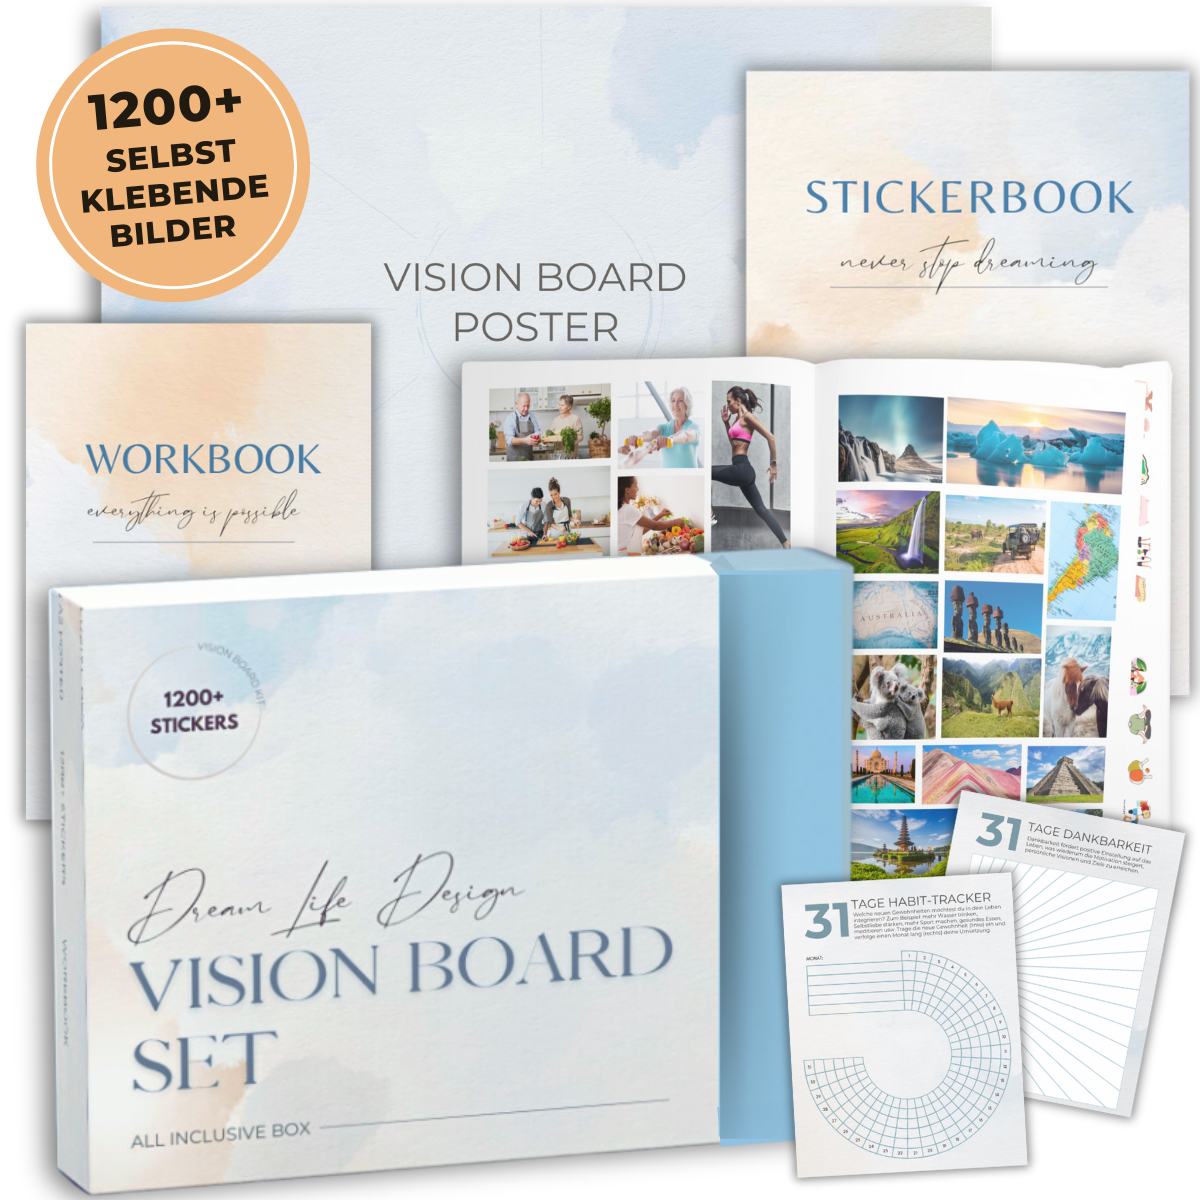 Vision Board KIT | All in One Box including A2 Poster | 1200+ self-adhesive images & stickers